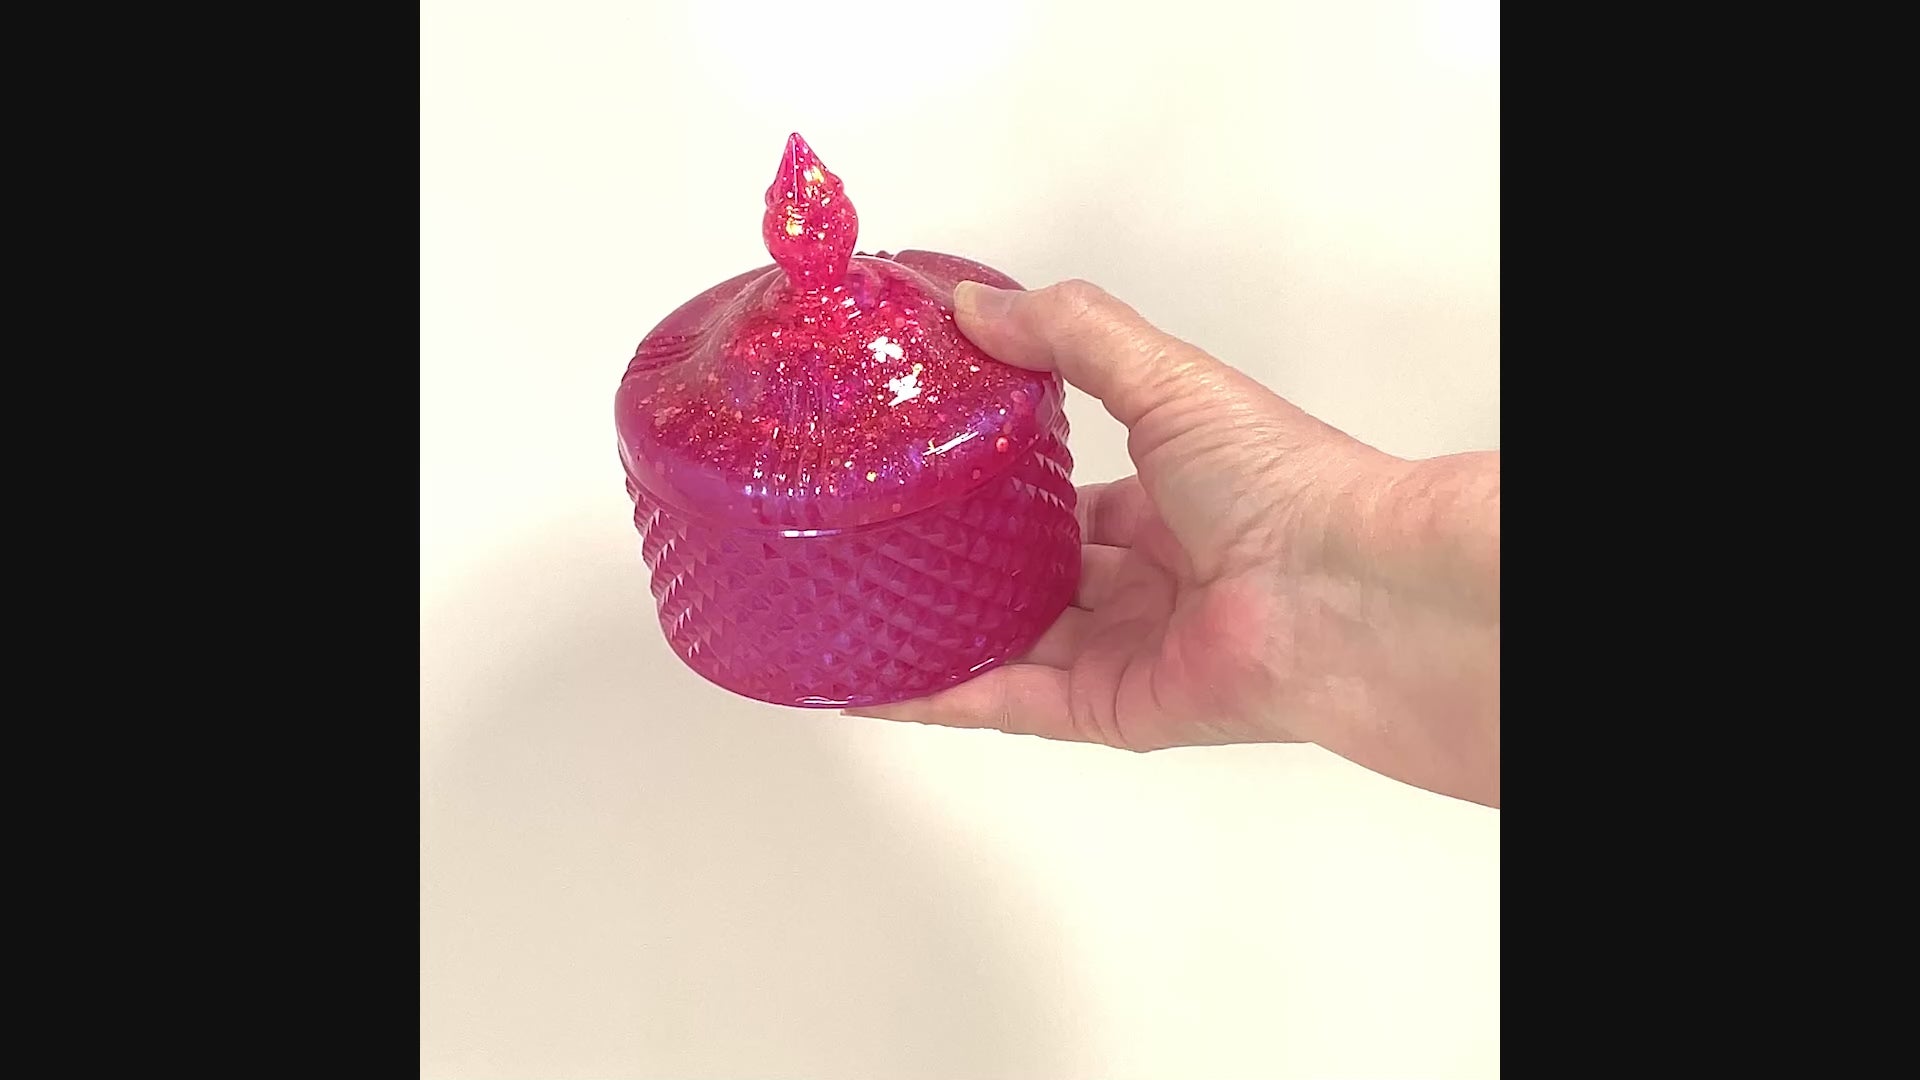 Handmade Pearly Bright Pink Trinket Box Candy Dish with Iridescent Glitter video showing how the glitter sparkles in the light.